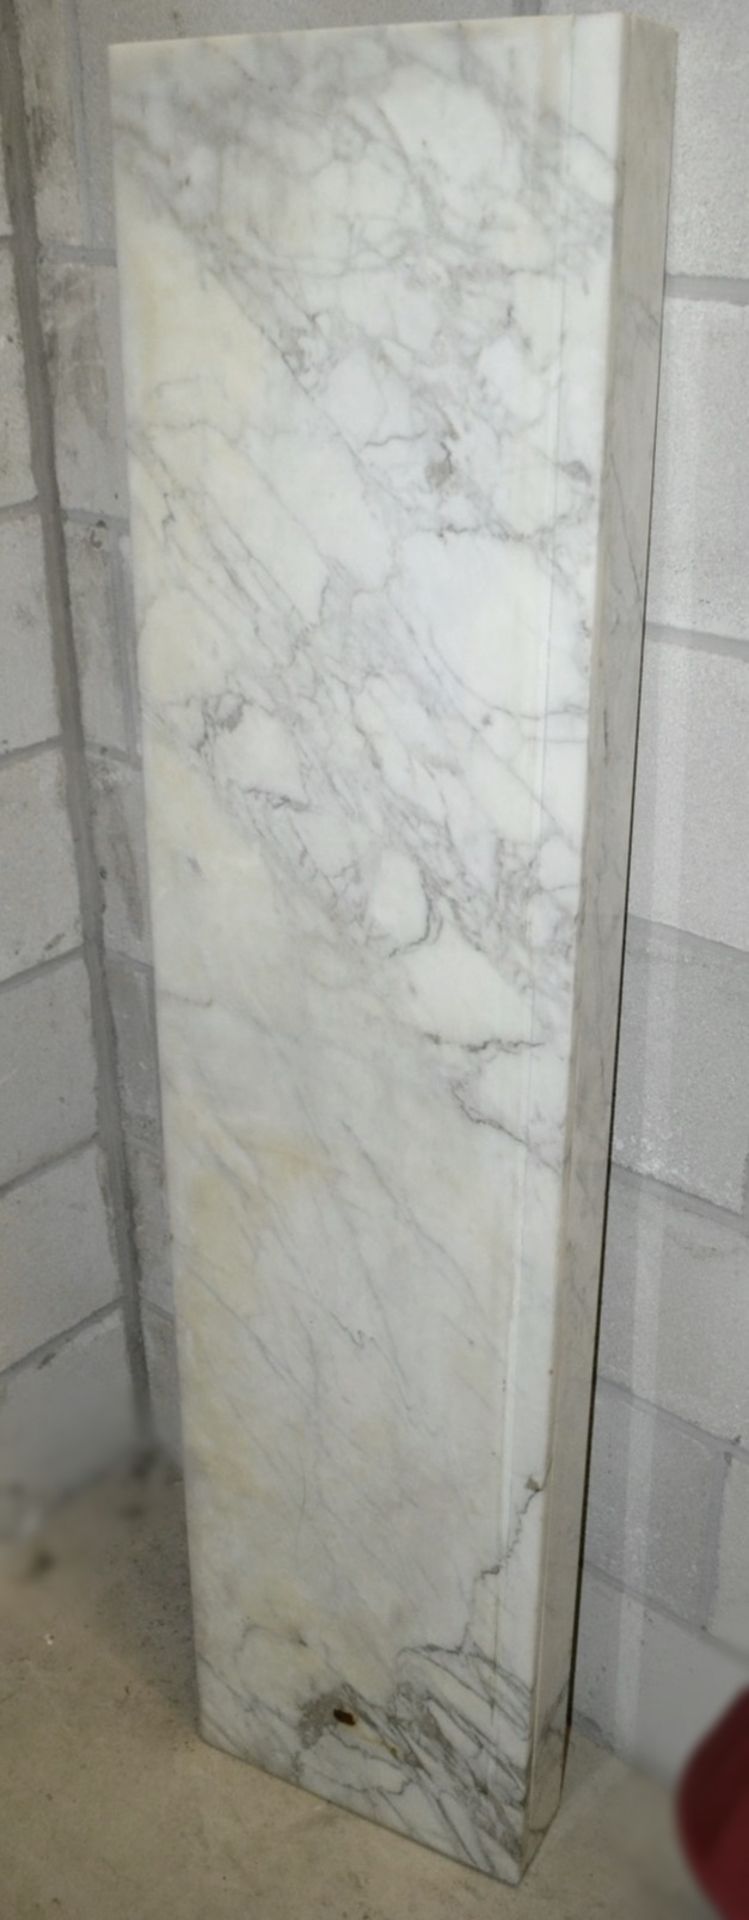 1 x White Marble/Granite Breakfast / Coffee Bar - Two Piece - Ref: BRE016 - CL421 - From A Milan- - Image 2 of 3